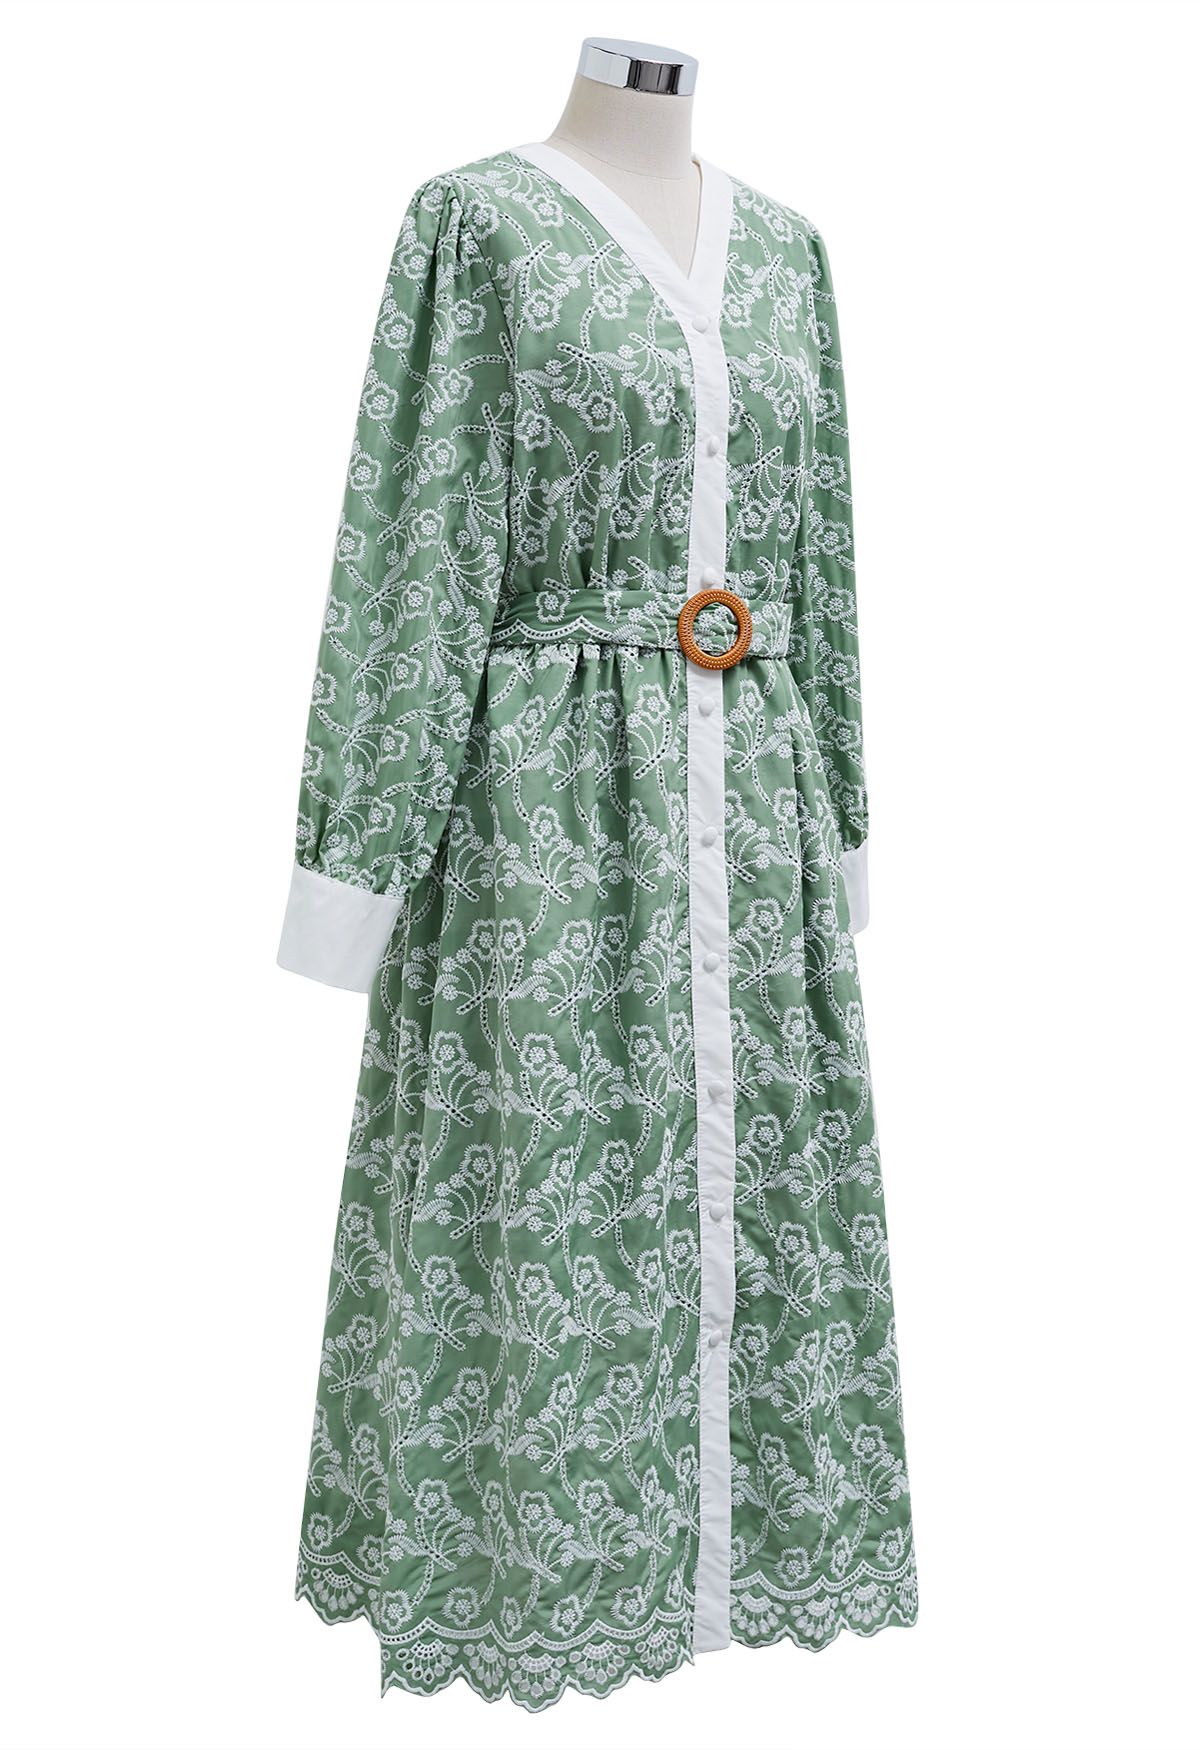 Dancing Floret Embroidered Button Down Dress in Green